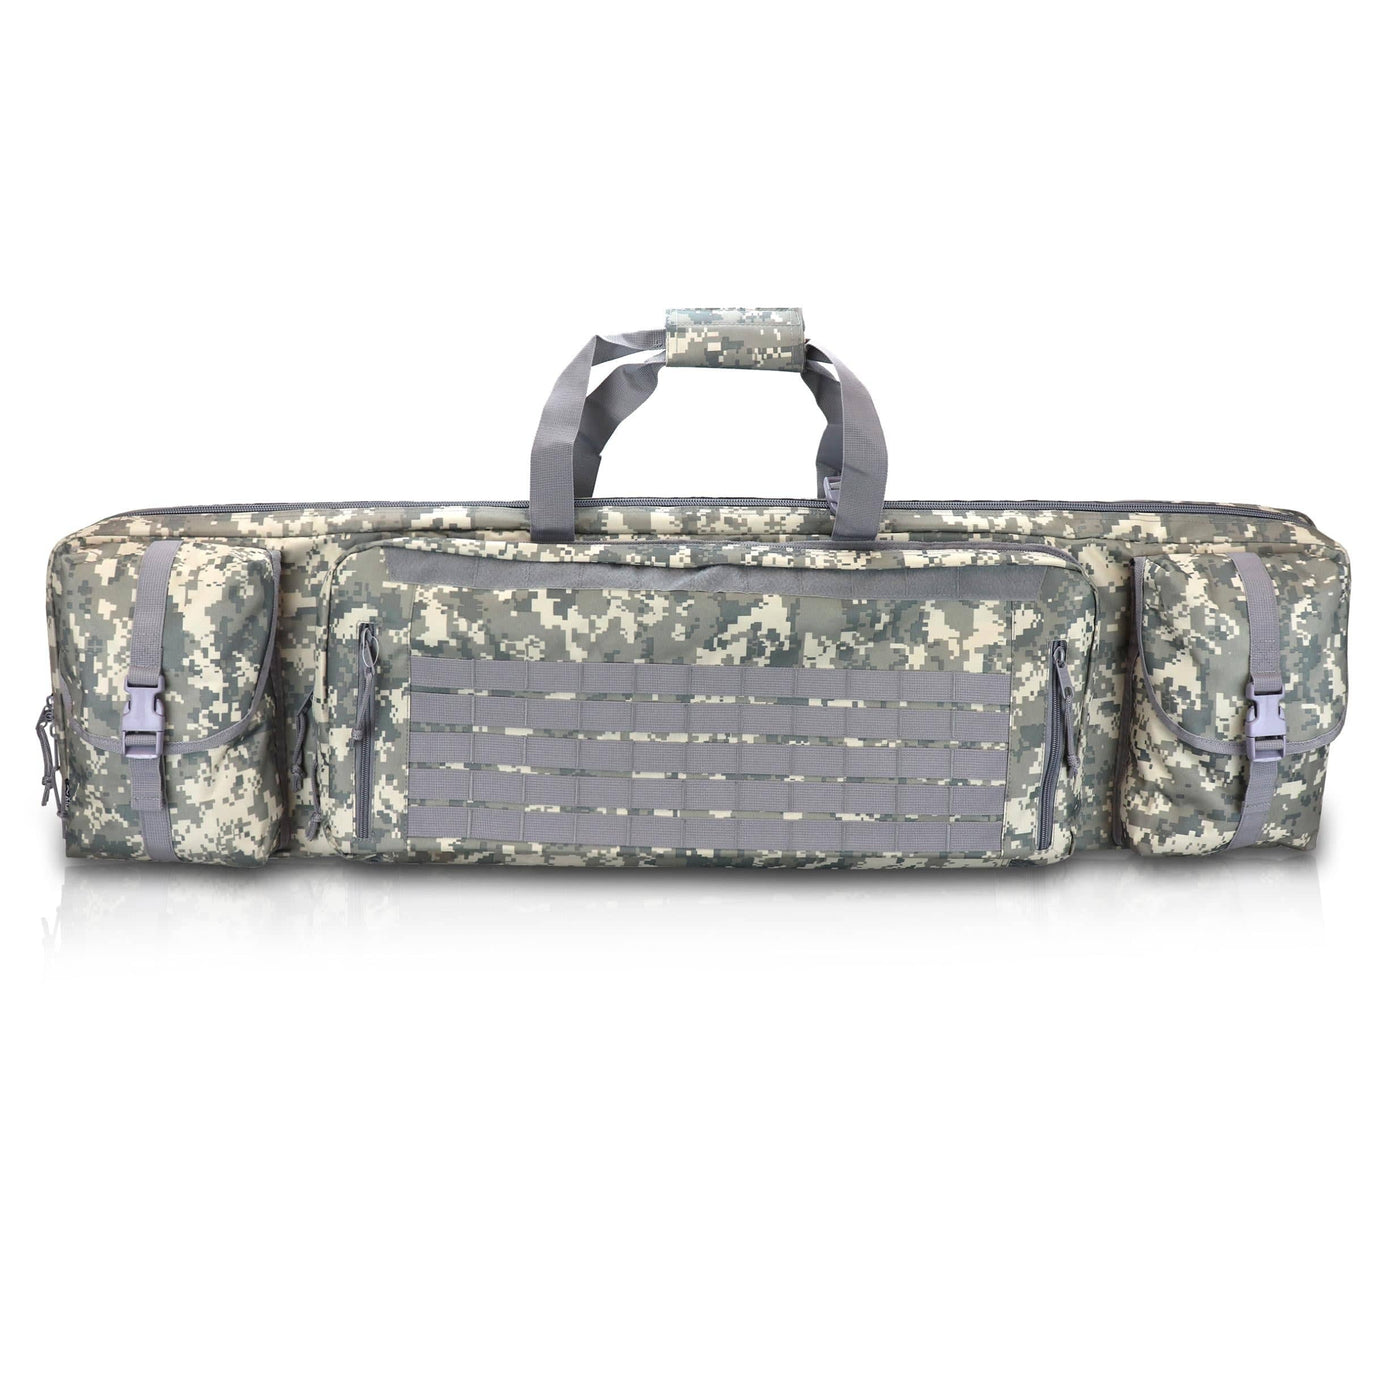 Osage River Osage River 42 in Double Rifle Case ACU Digital Camo Shooting